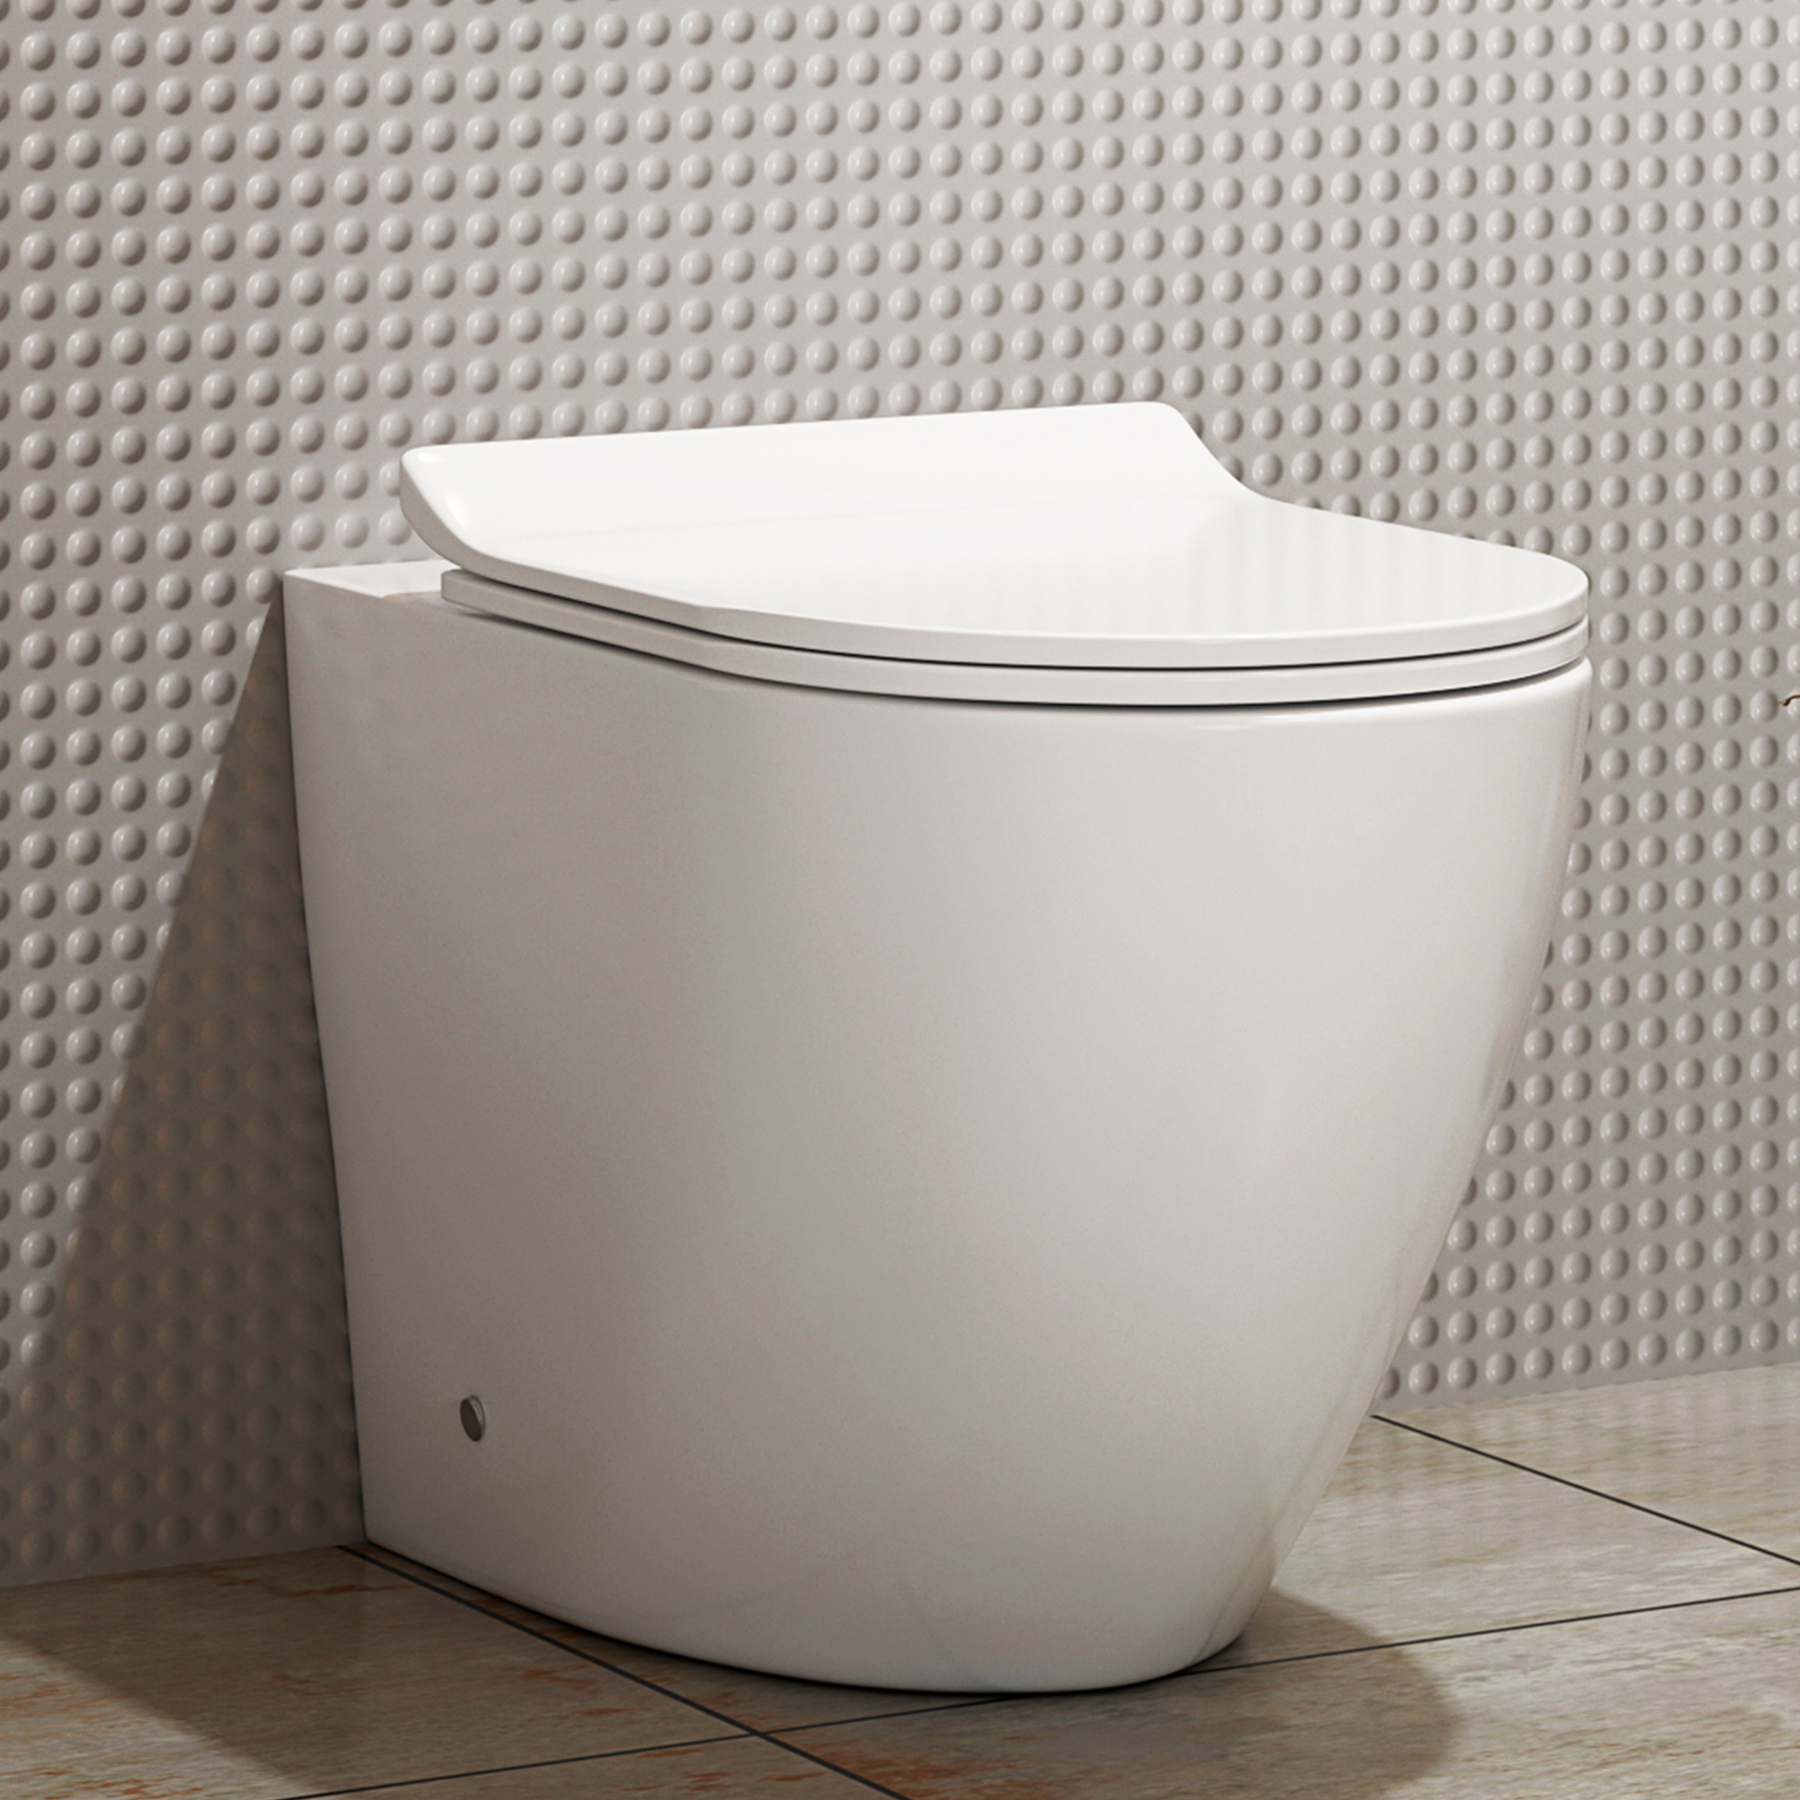 Abacus Gloss White Back to Wall Toilet with Slim Soft Close Seat - Round